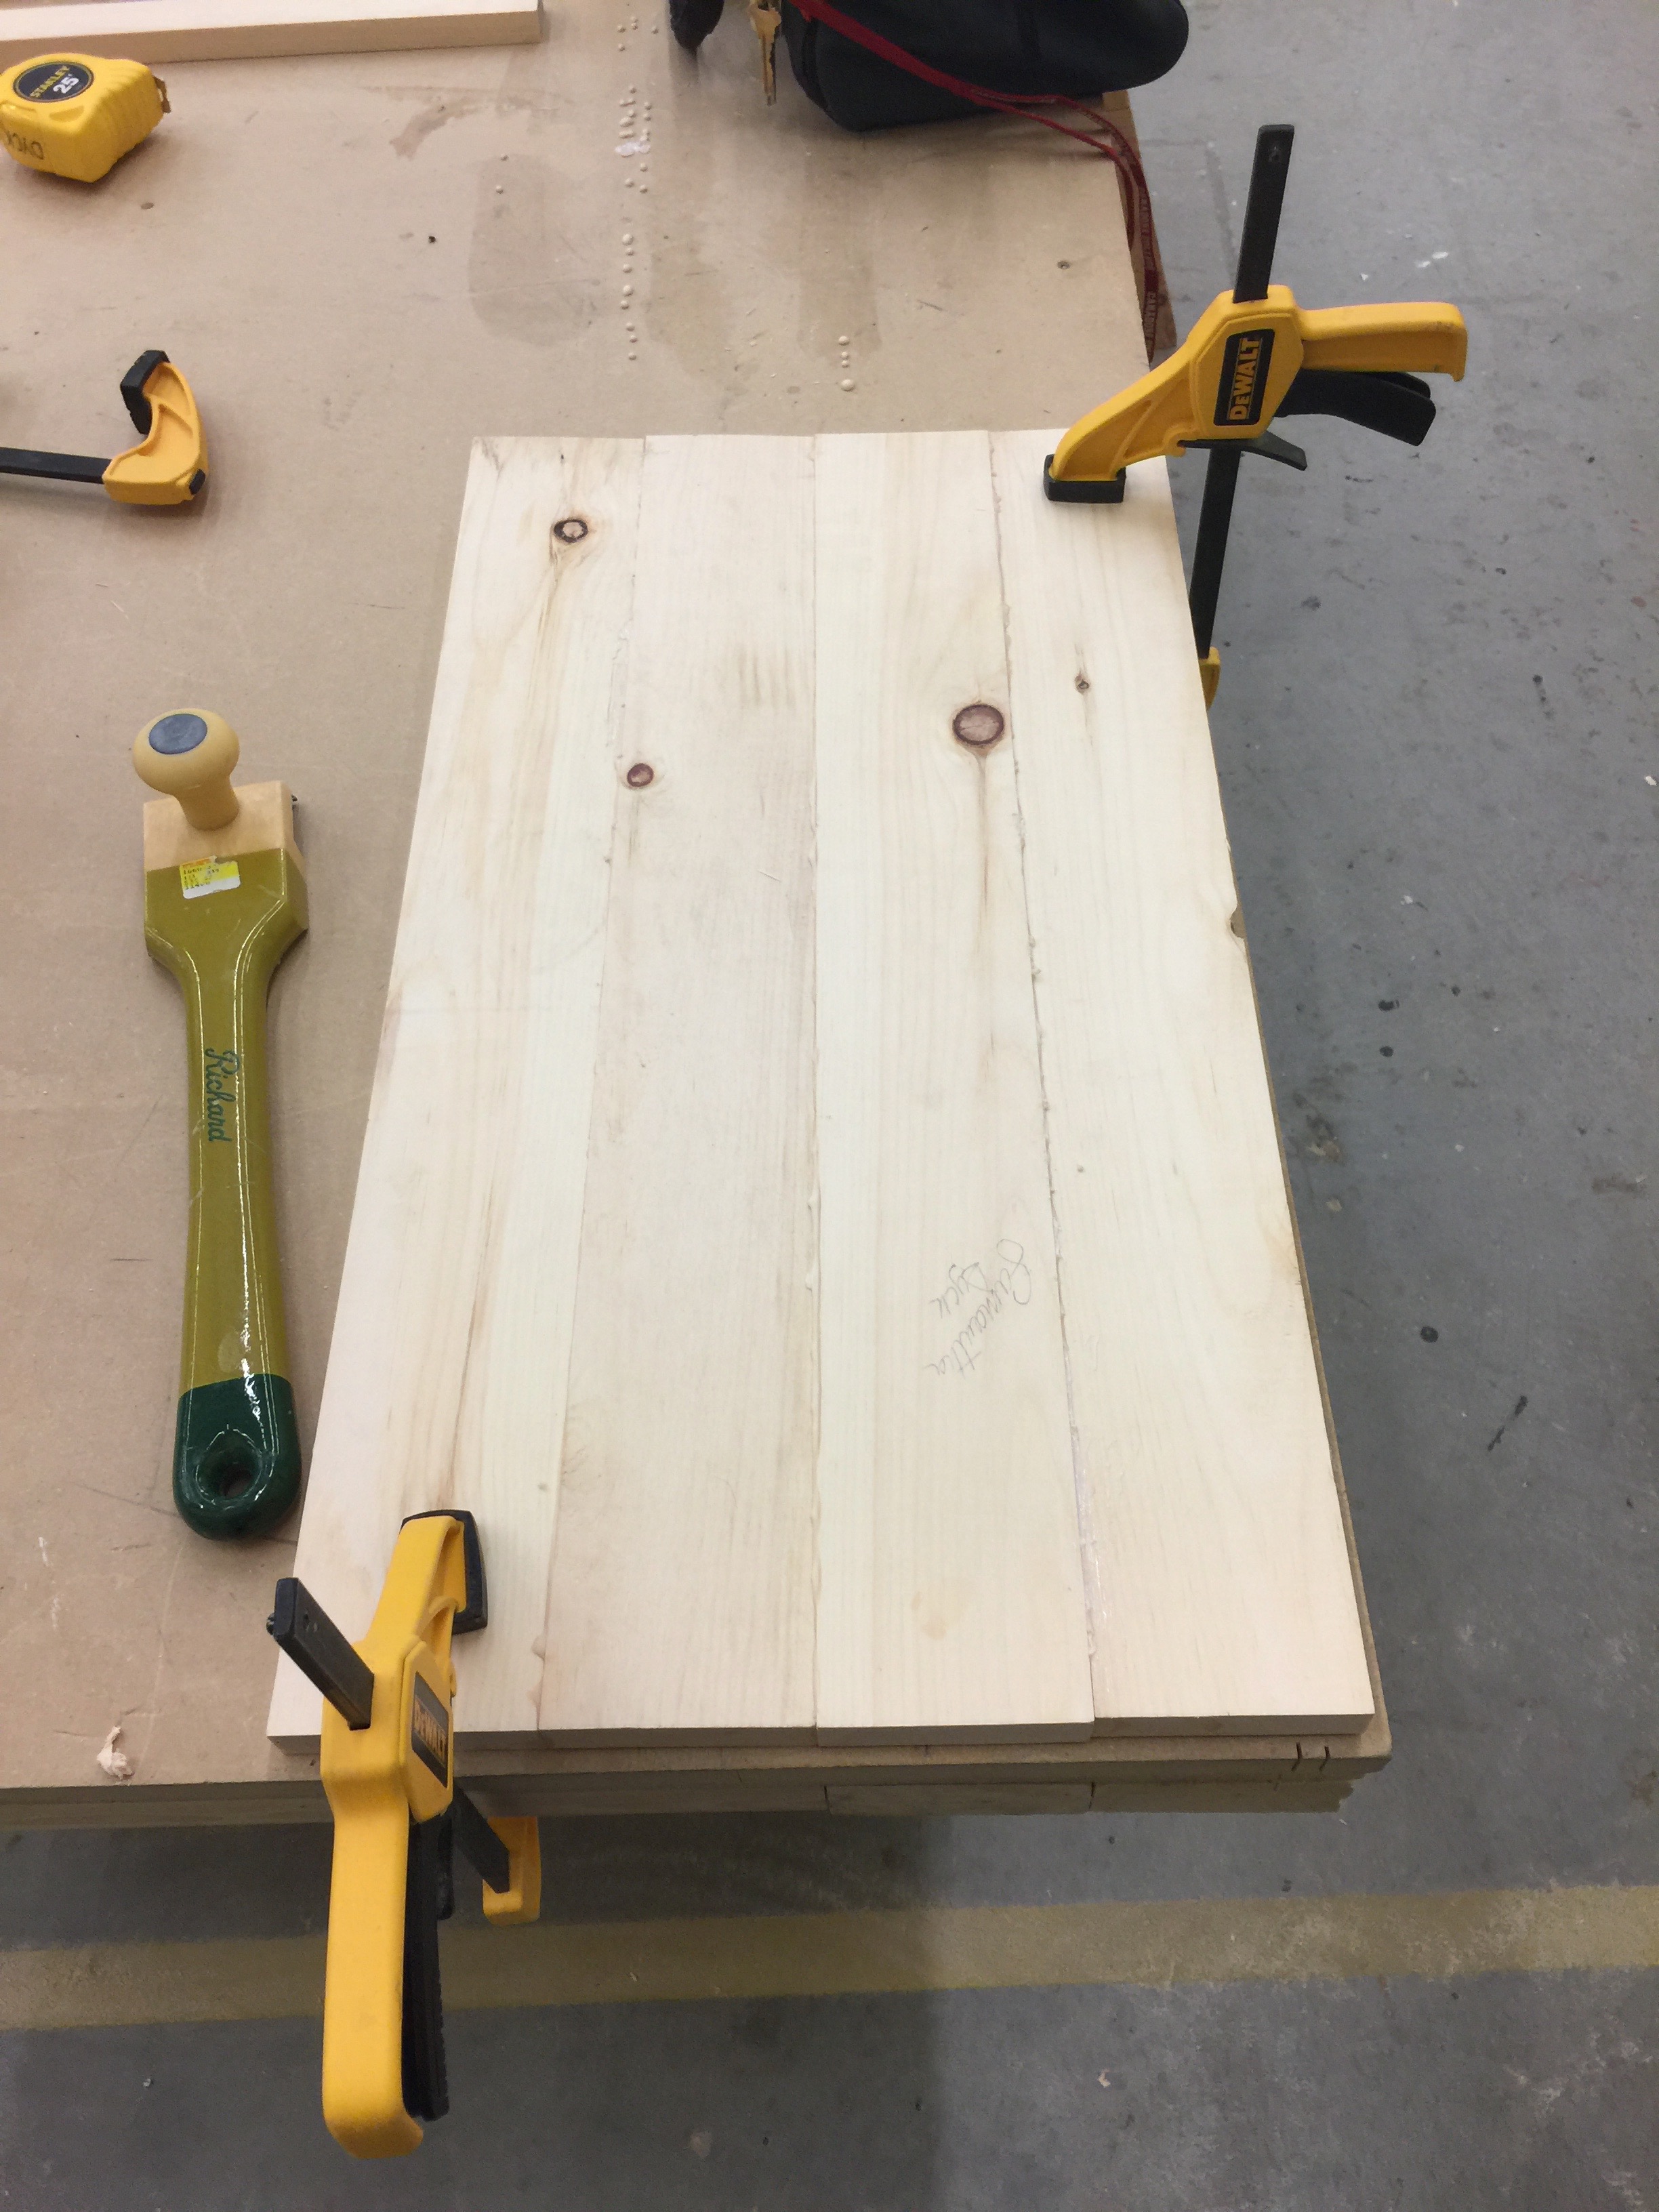 Wood clamped down